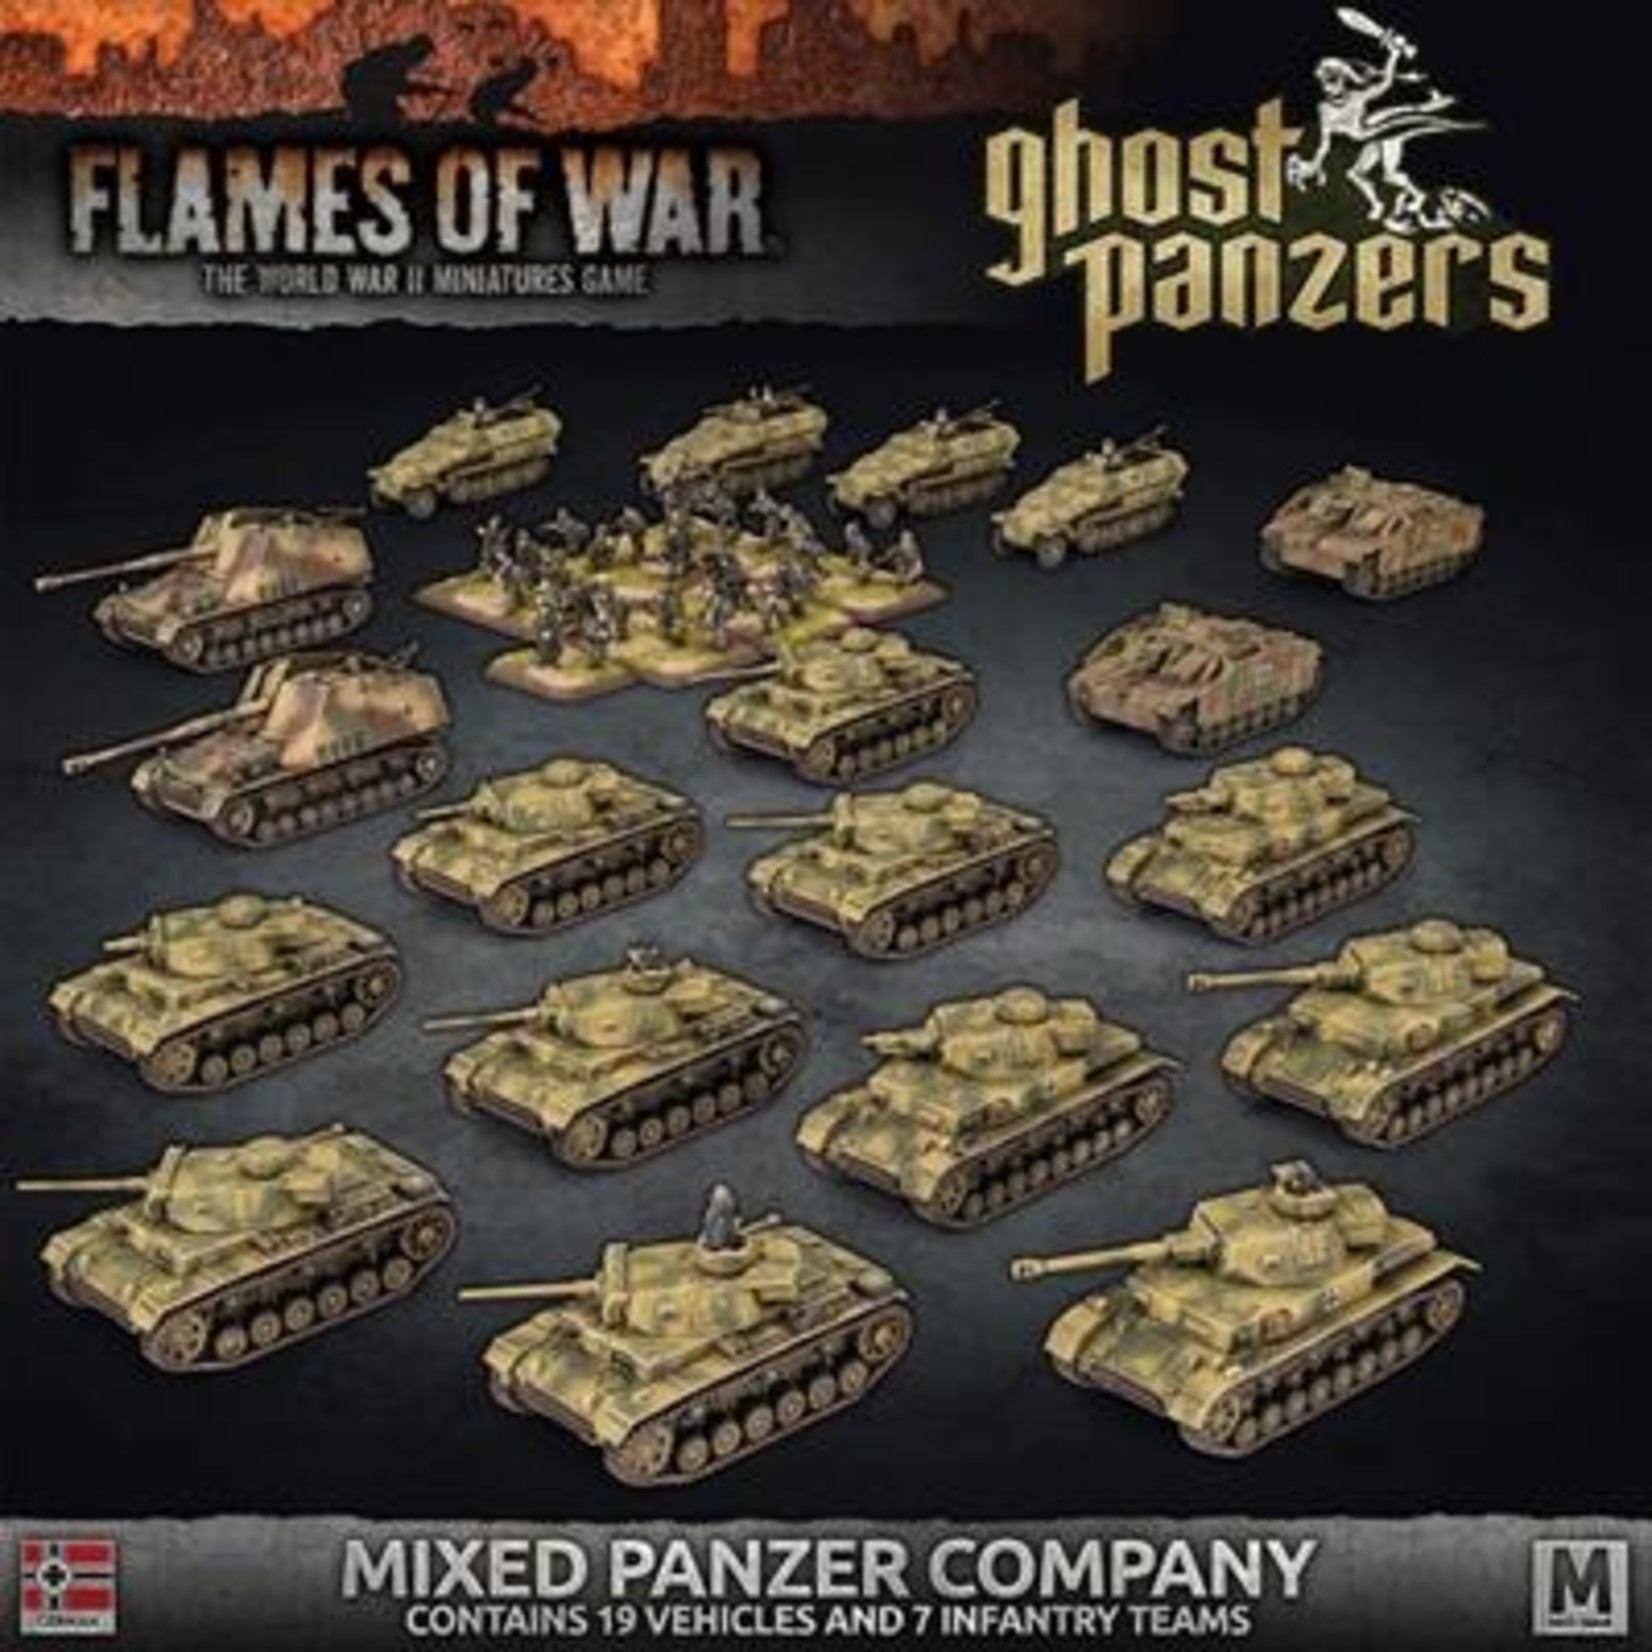 Battlefront Miniatures Ghost Panzers Mixed Panzer Company Army Deal